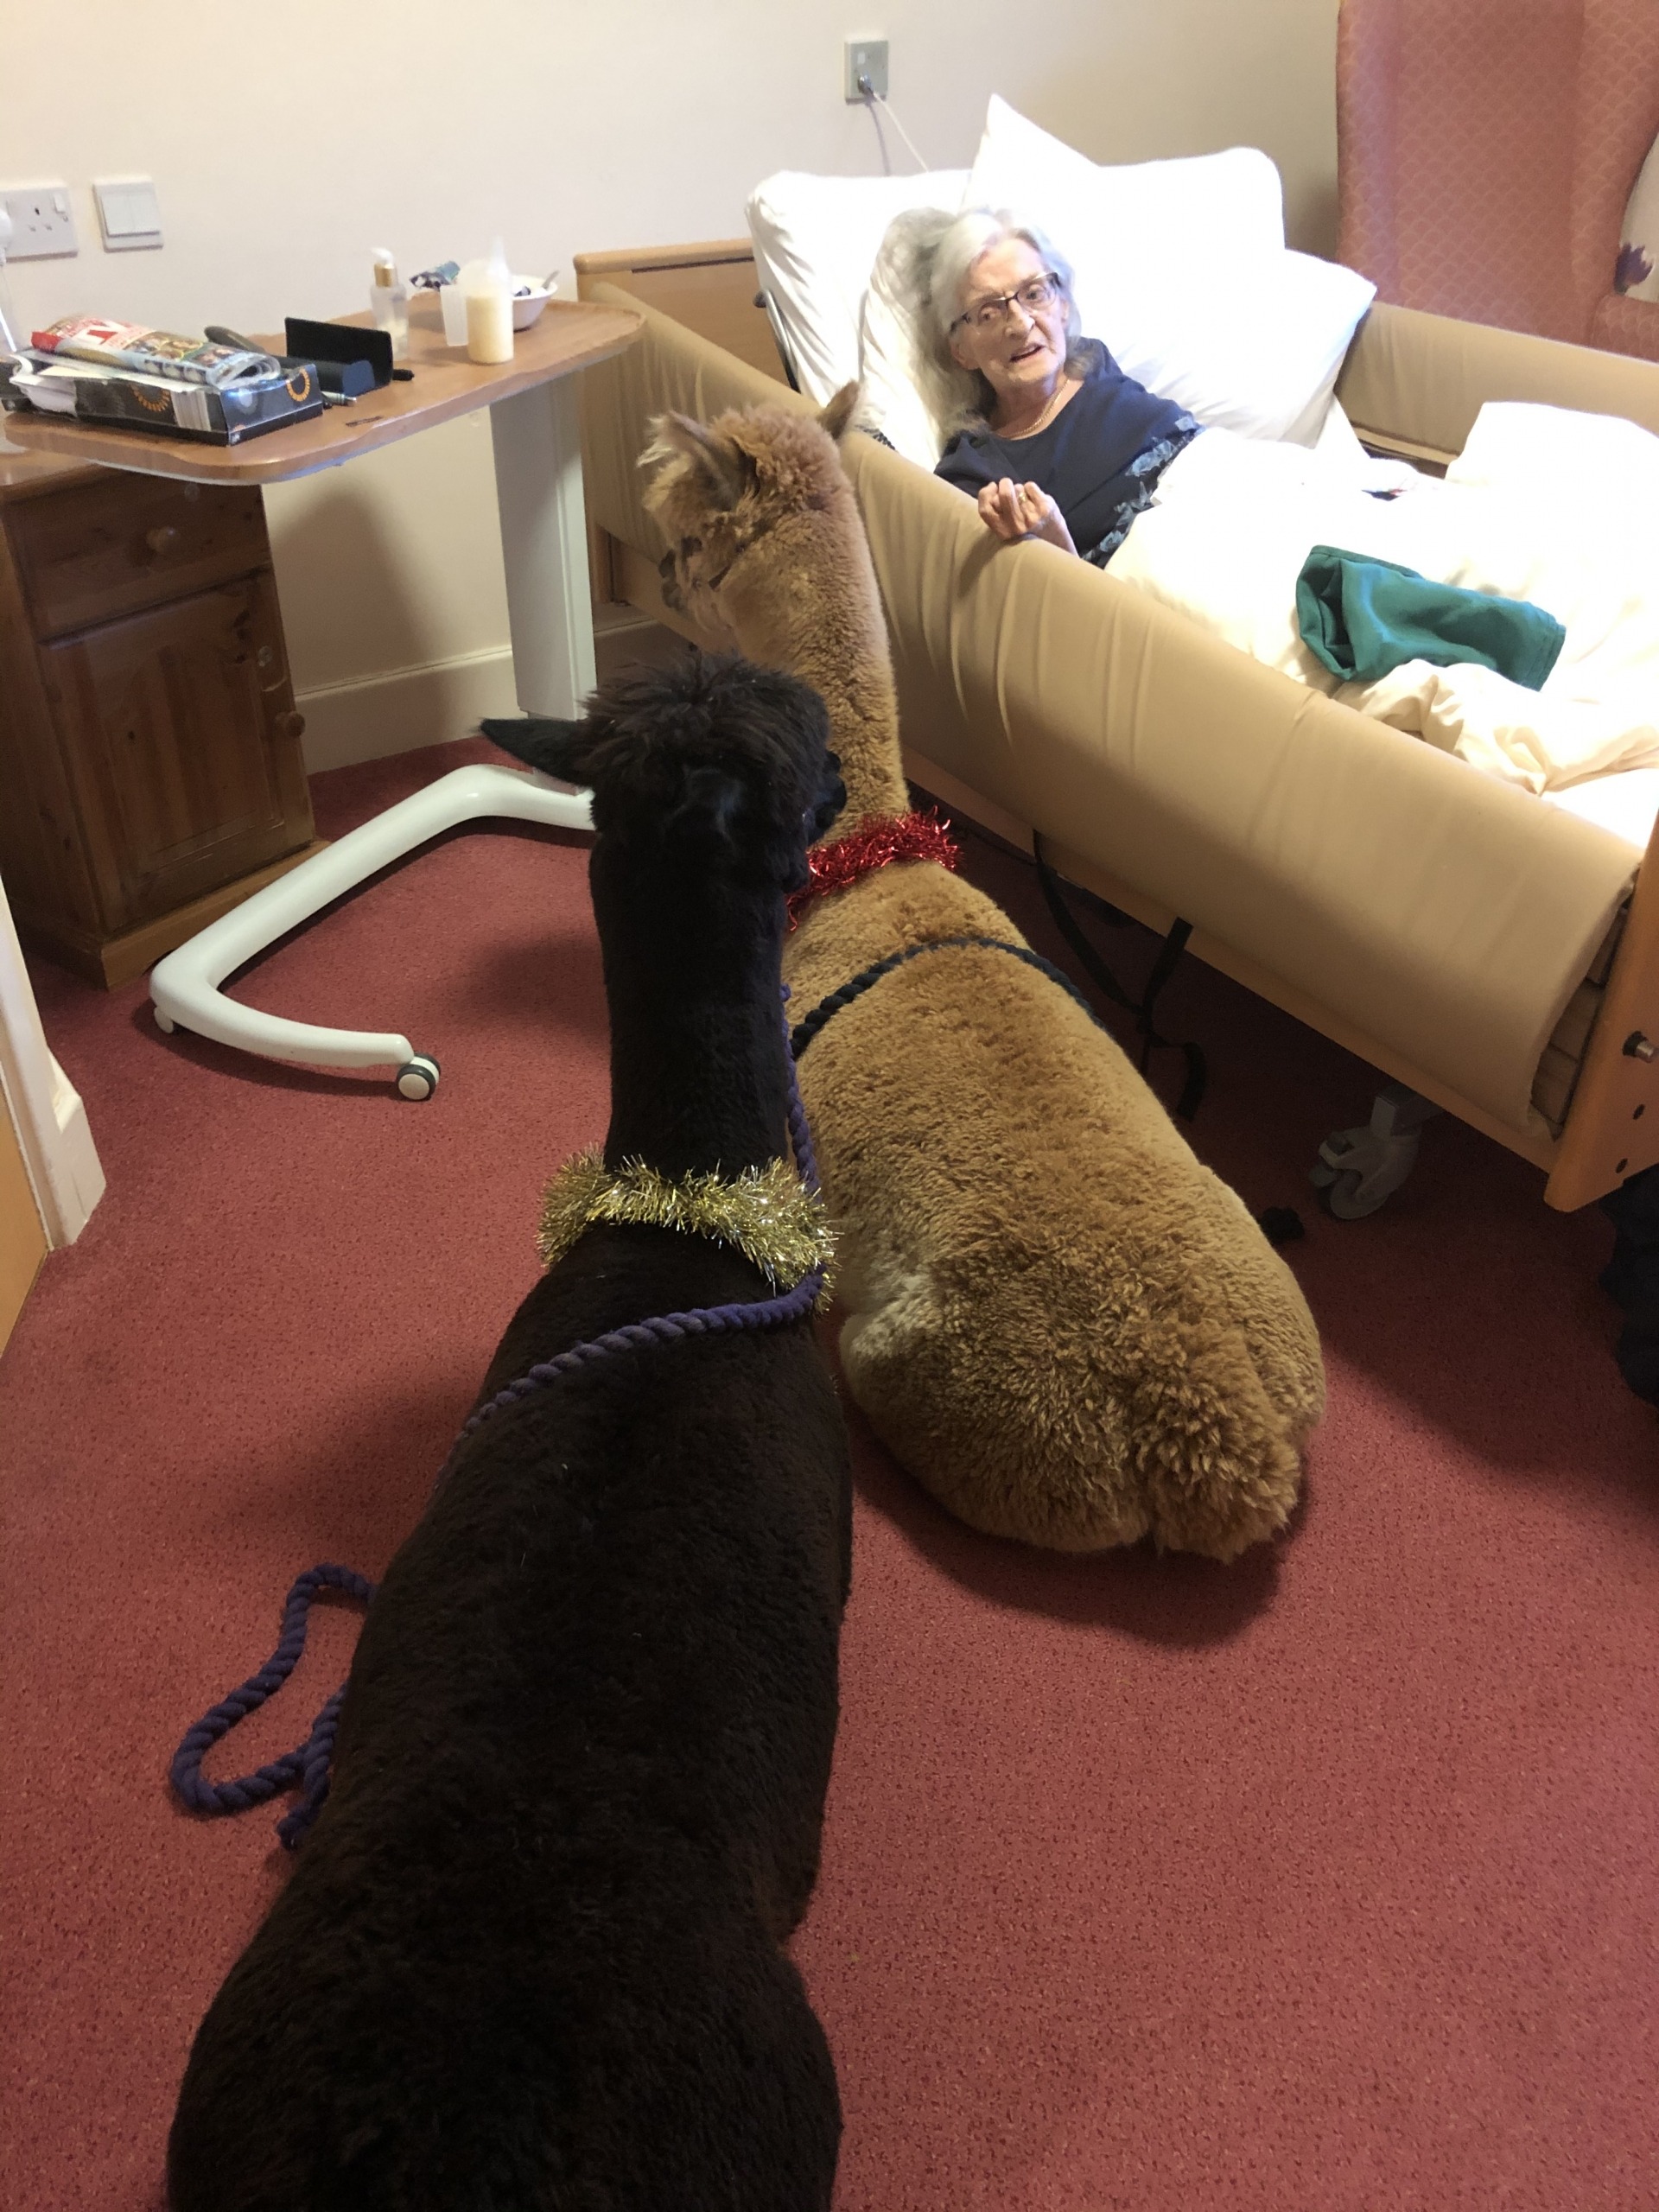 The Care Home residents and staff thoroughly enjoyed the alpacas and their pals